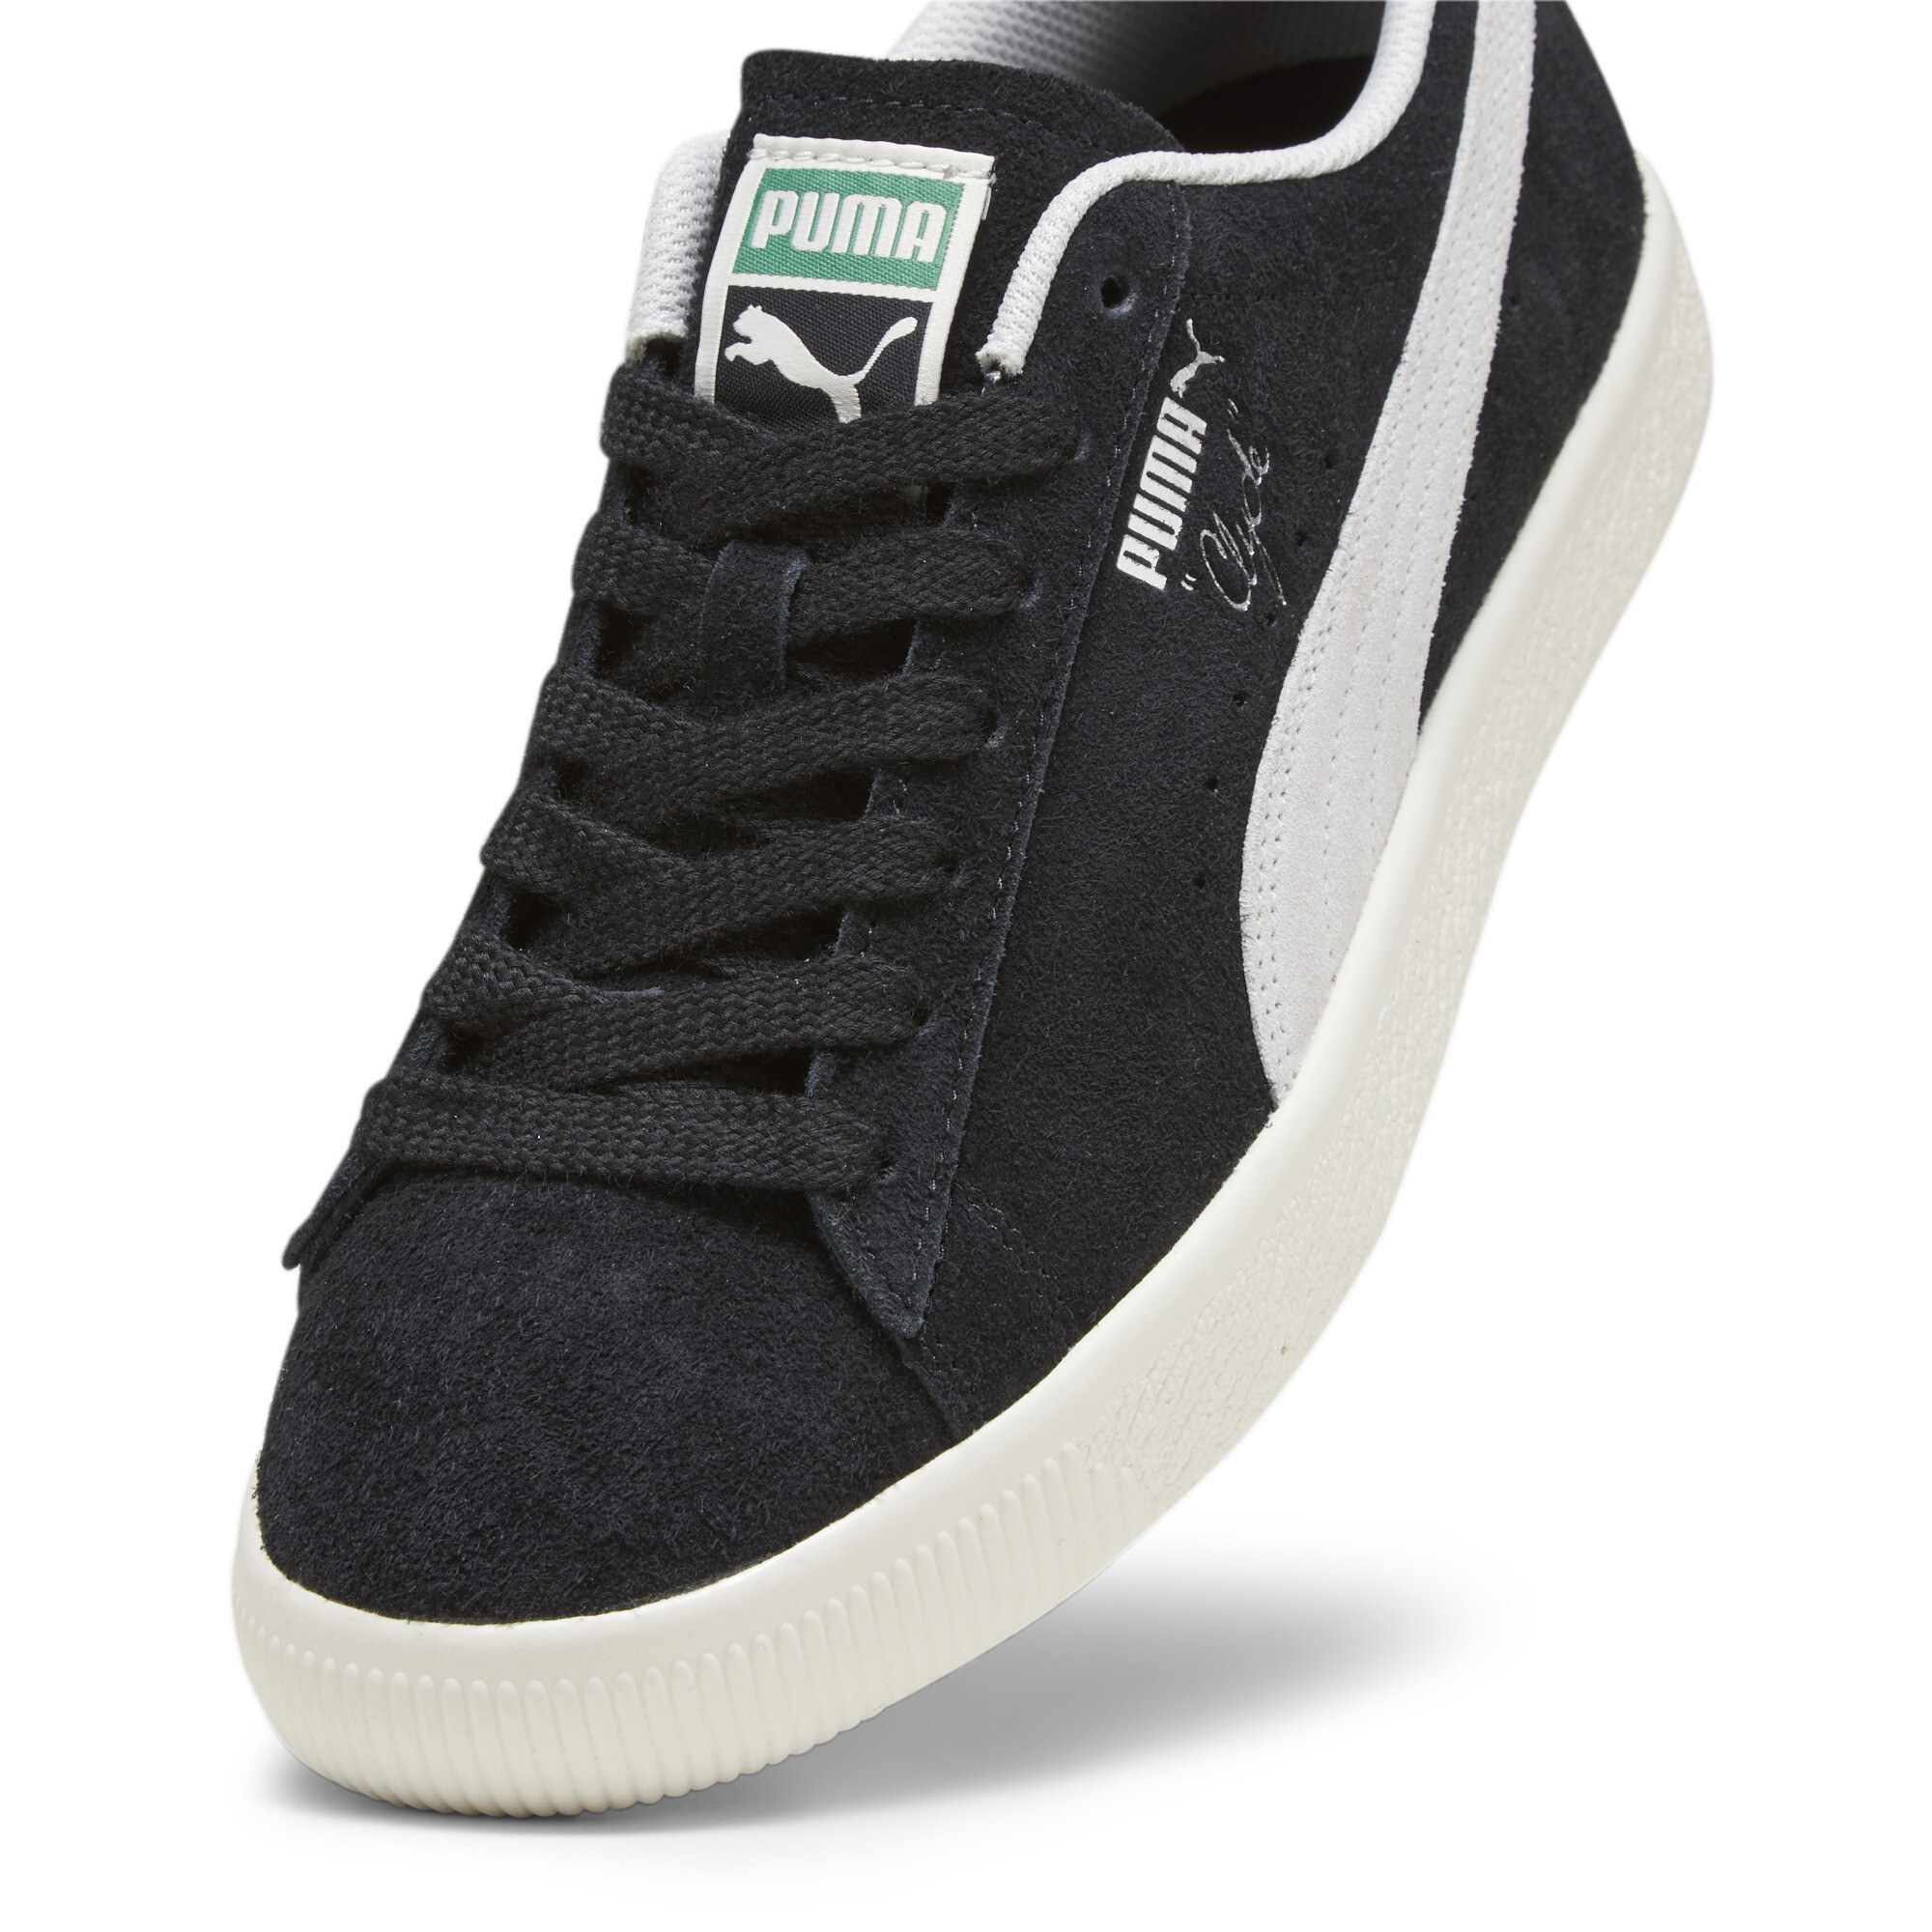 Men's PUMA Clyde Hairy Suede Sneakers In 10 - Black, Size EU 42.5